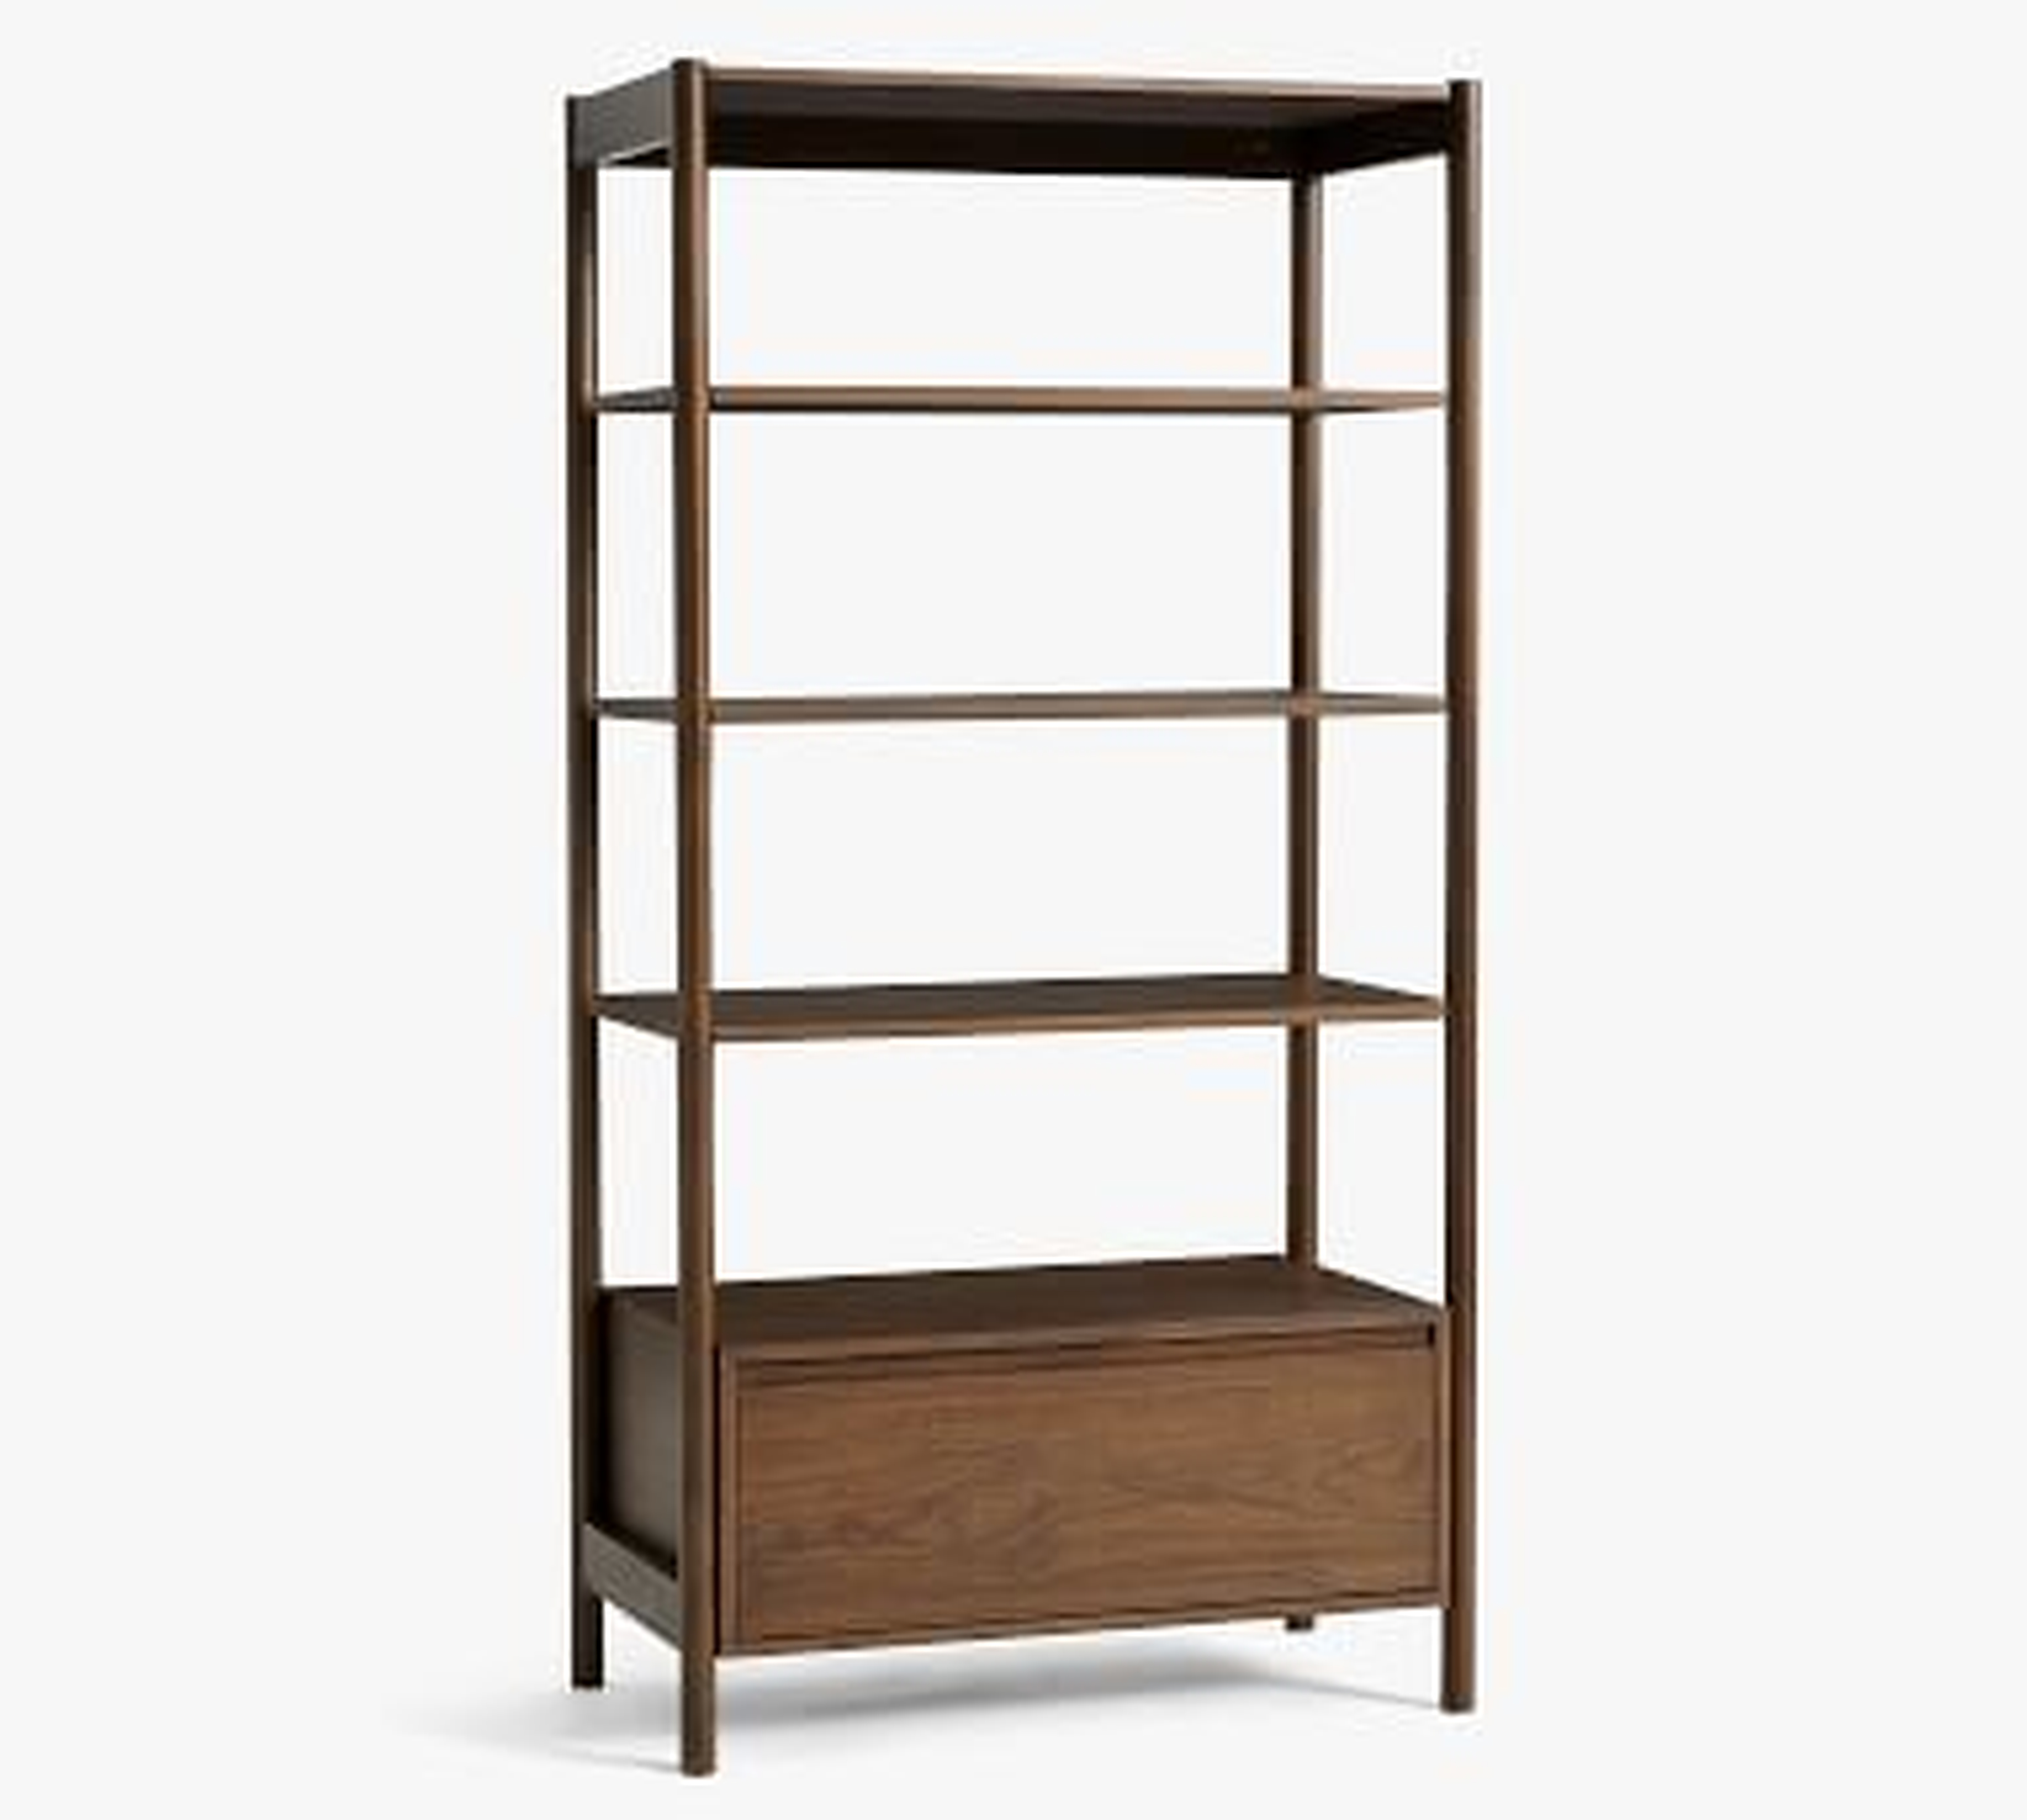 Bloomquist 37" x 73" Bookcase with Drawer, Warm Dusk - Pottery Barn